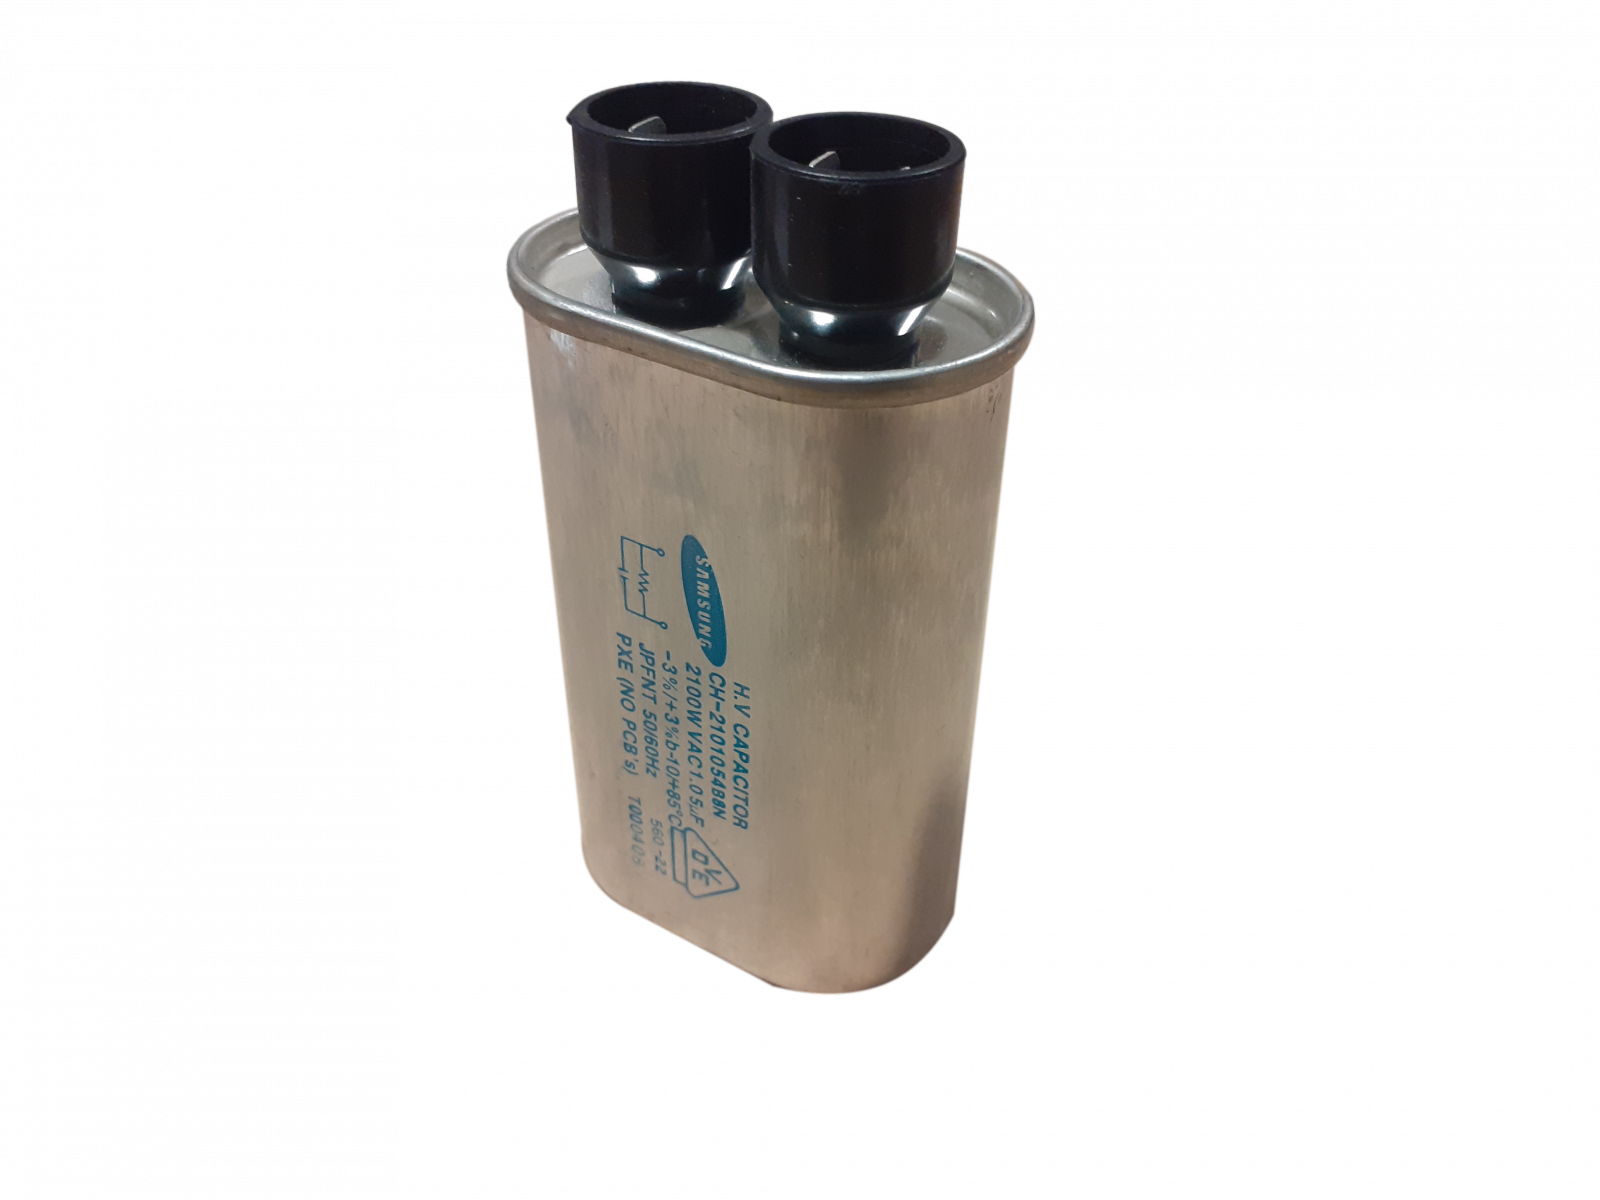 Highvoltage Capacitor (Capacity 1,1 mF, Voltage 2100V) for Whirlpool Indesit Microwaves Universal